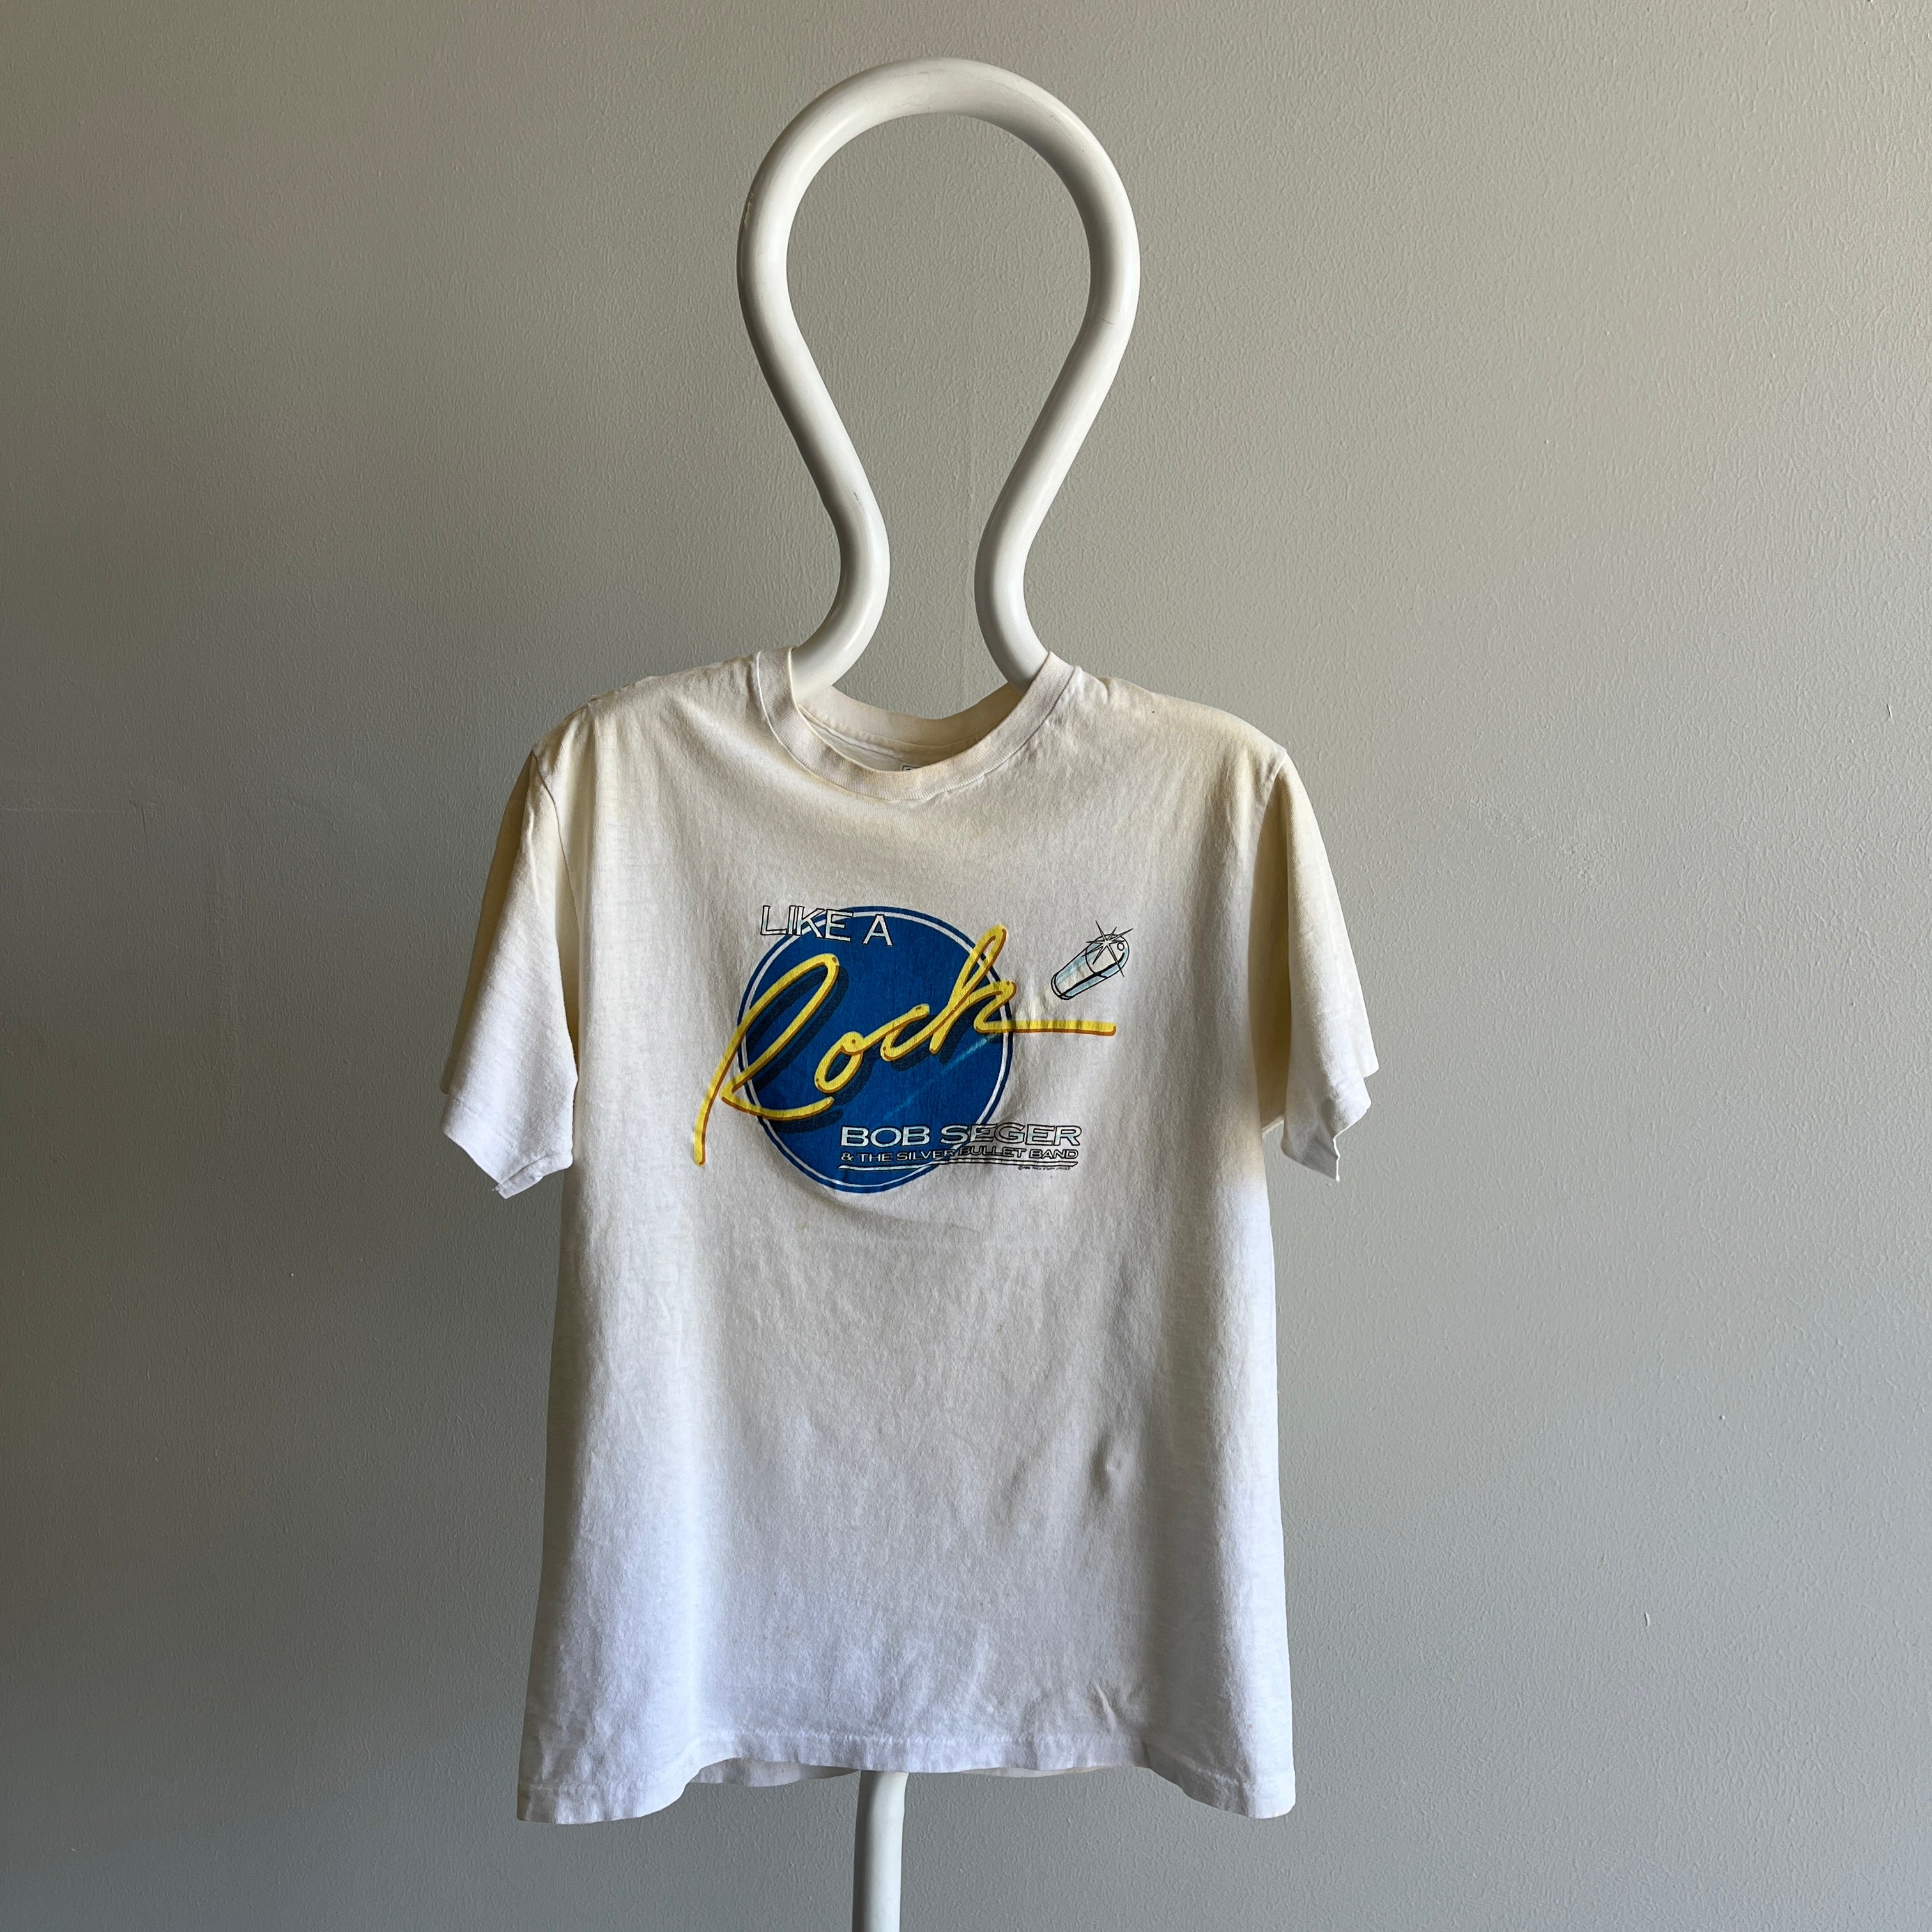 1986 Mended Bob Seger and The Silver Bullet Band Front and Back T-Shir ...